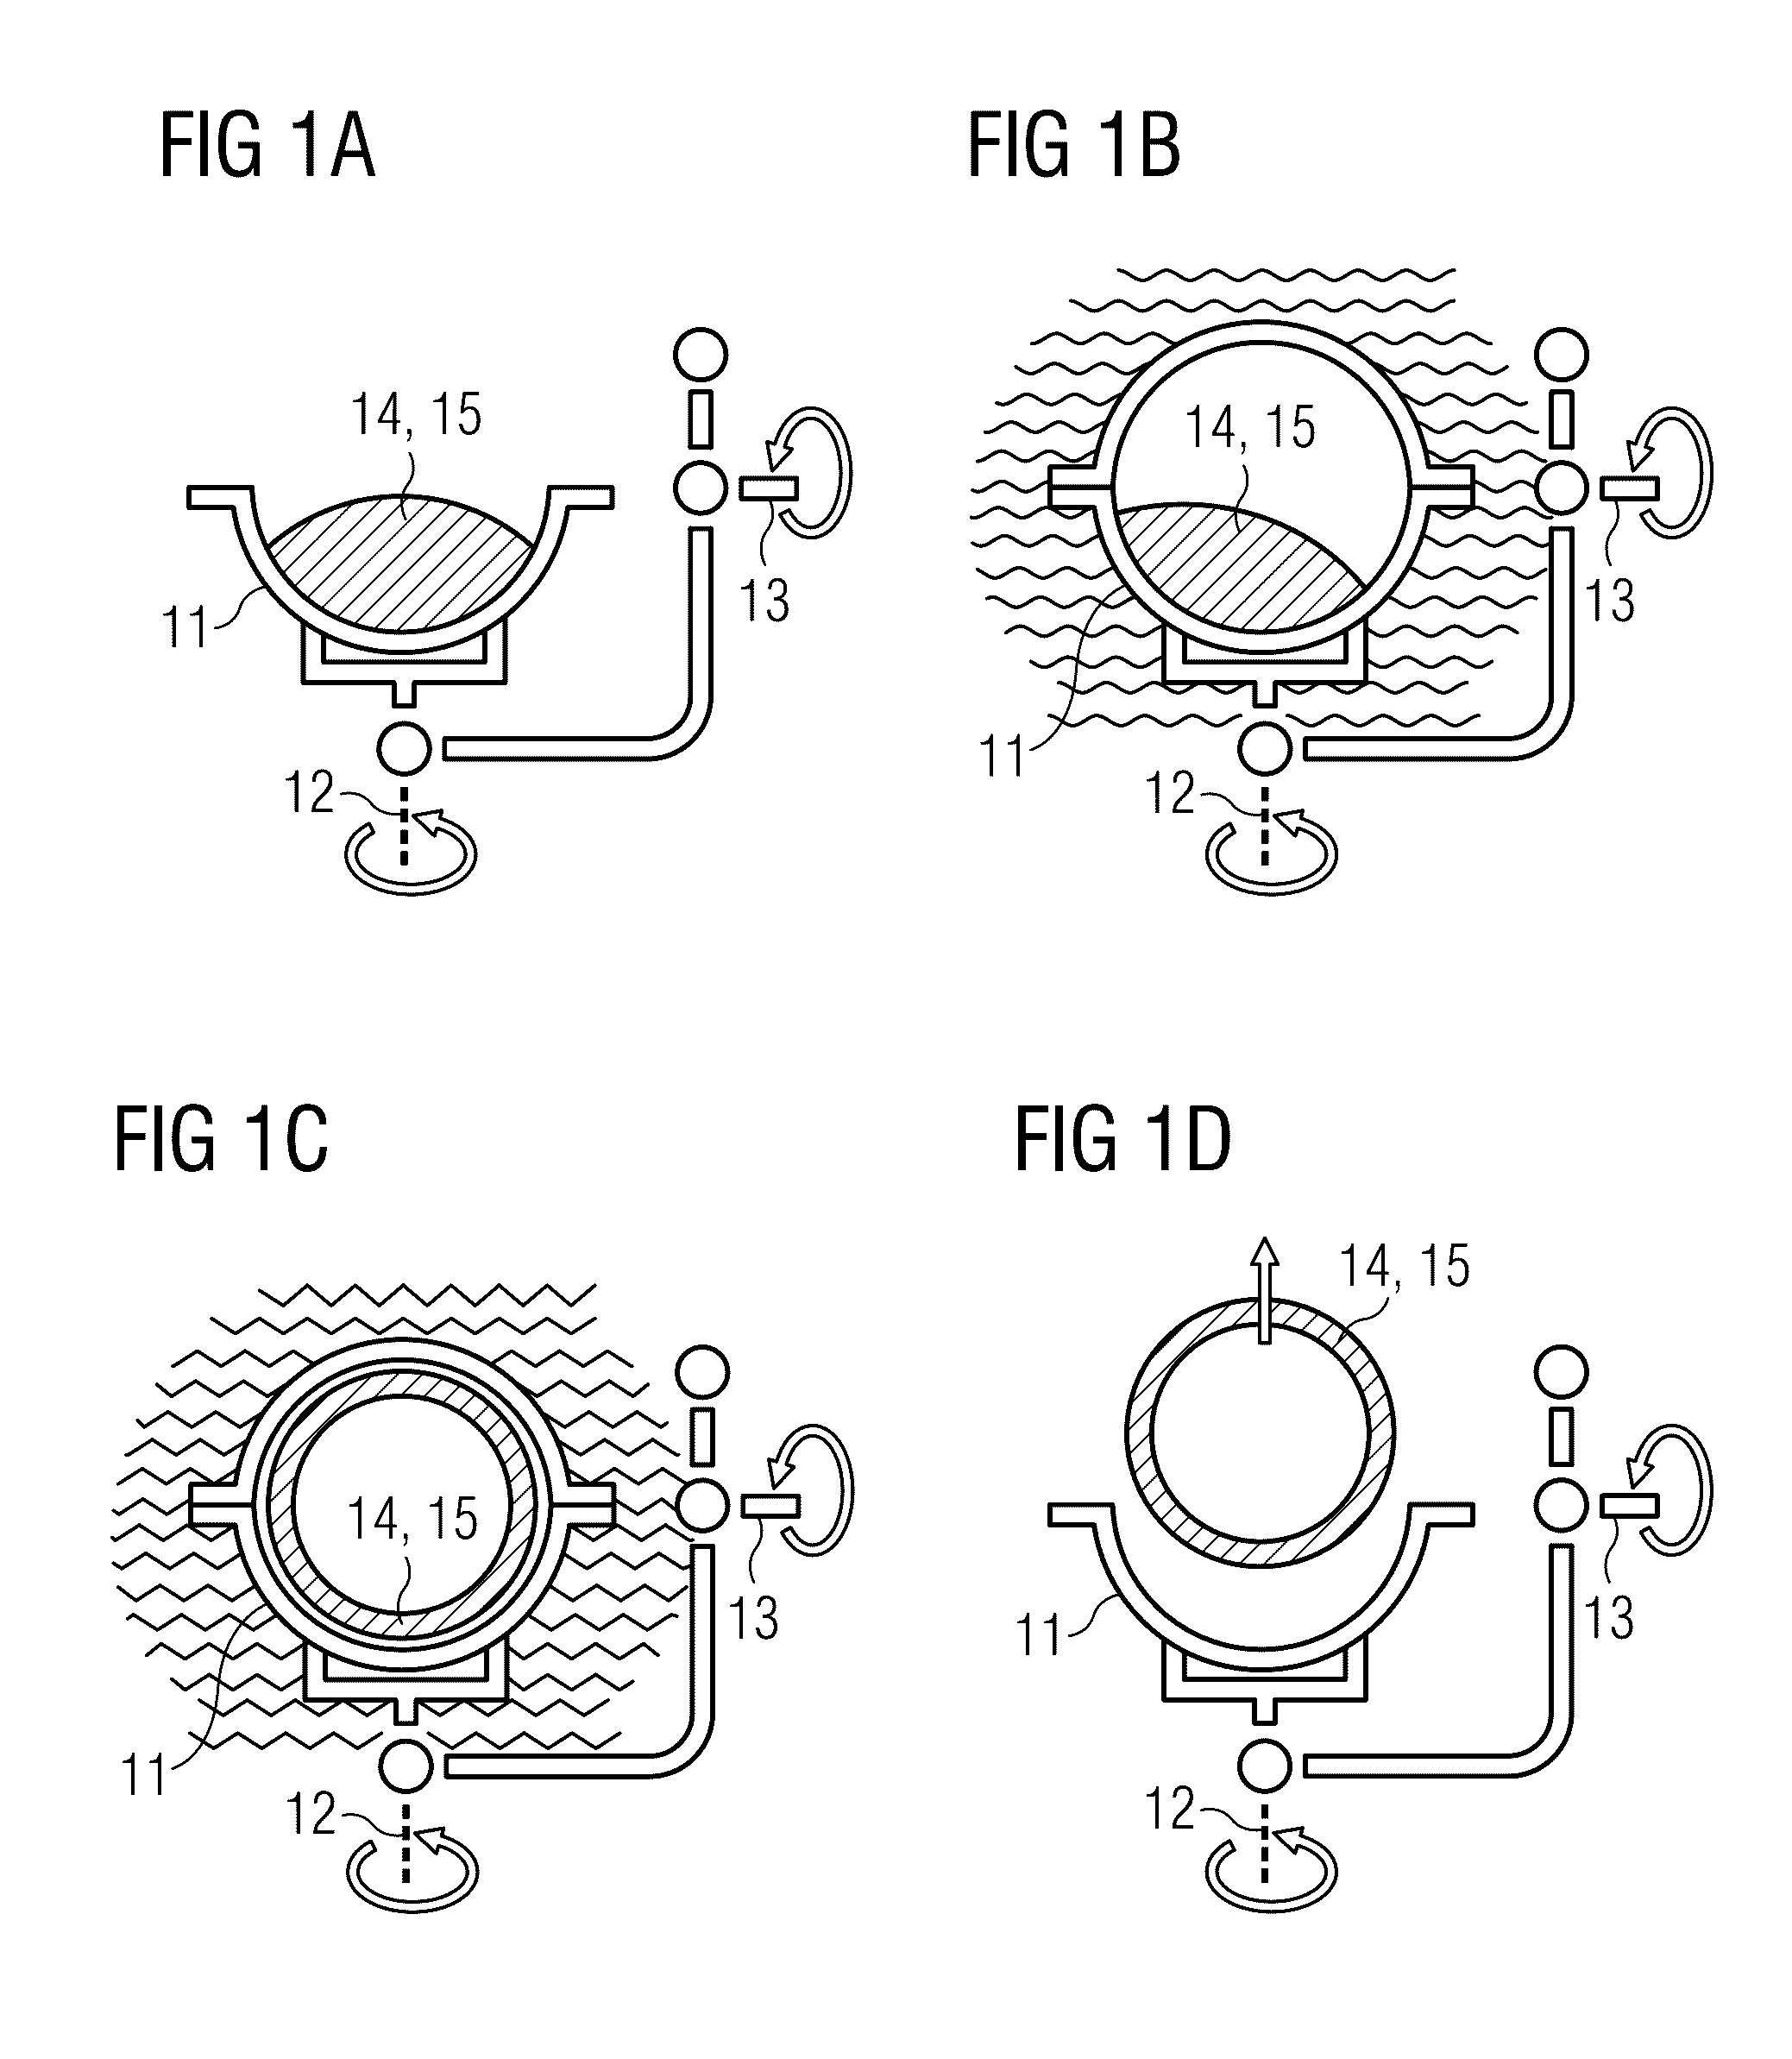 Method for manufacturing a three-dimensional composite object